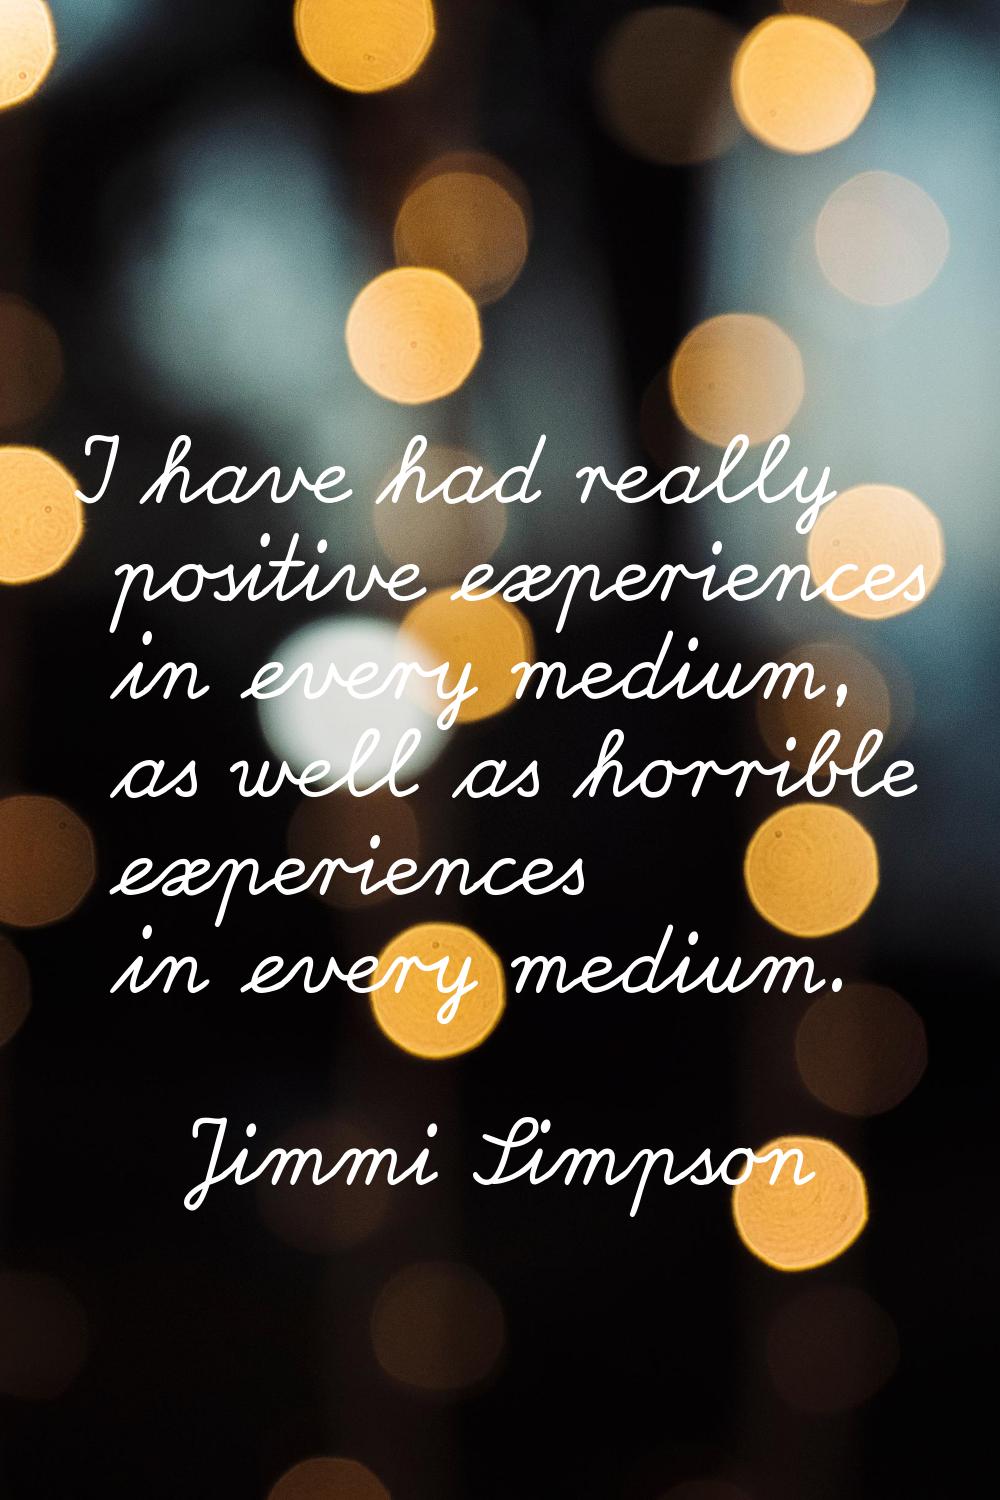 I have had really positive experiences in every medium, as well as horrible experiences in every me